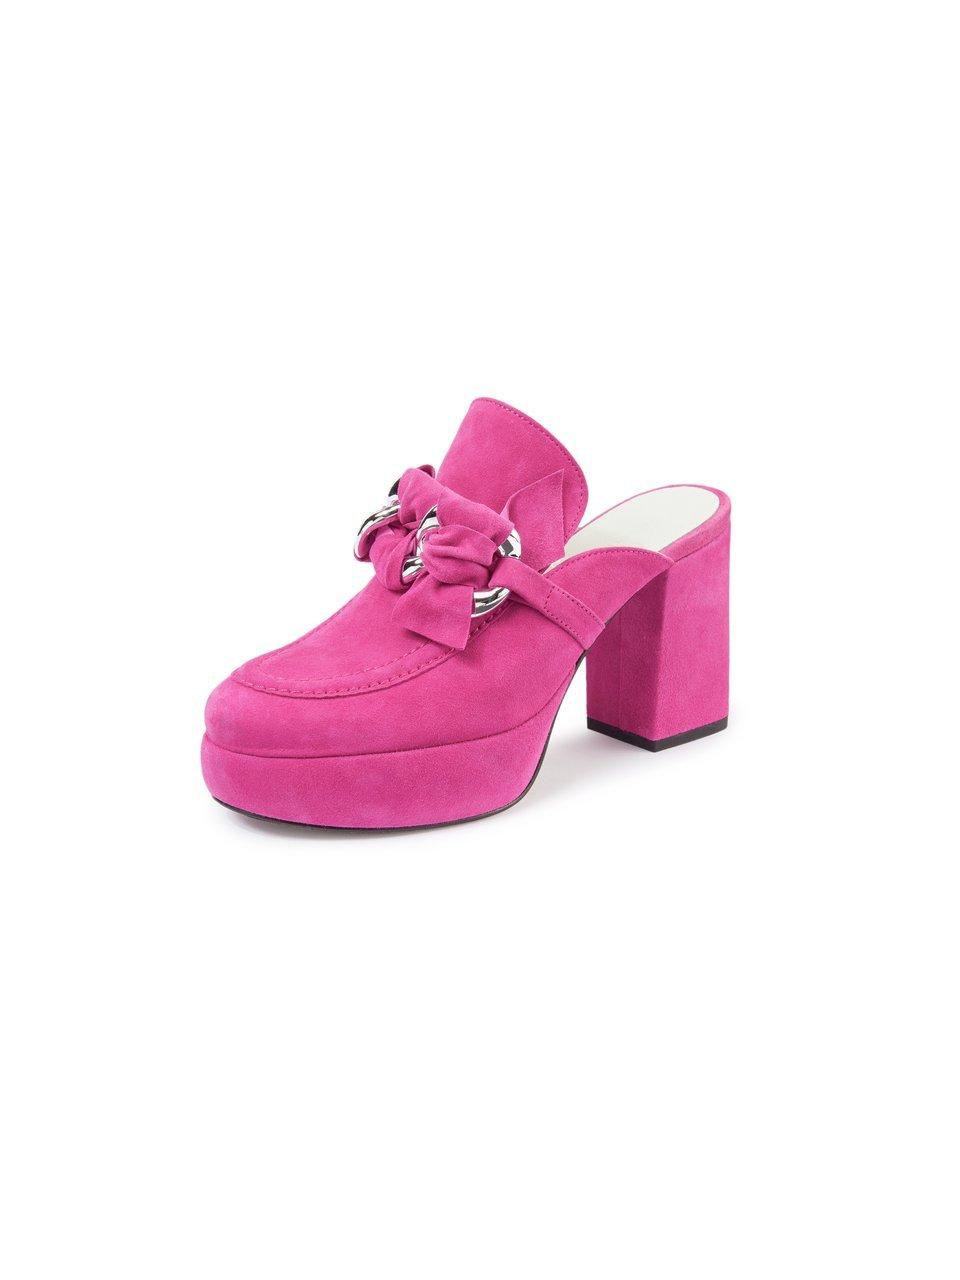 Slippers plateauzool Indie Van Kennel & Schmenger pink